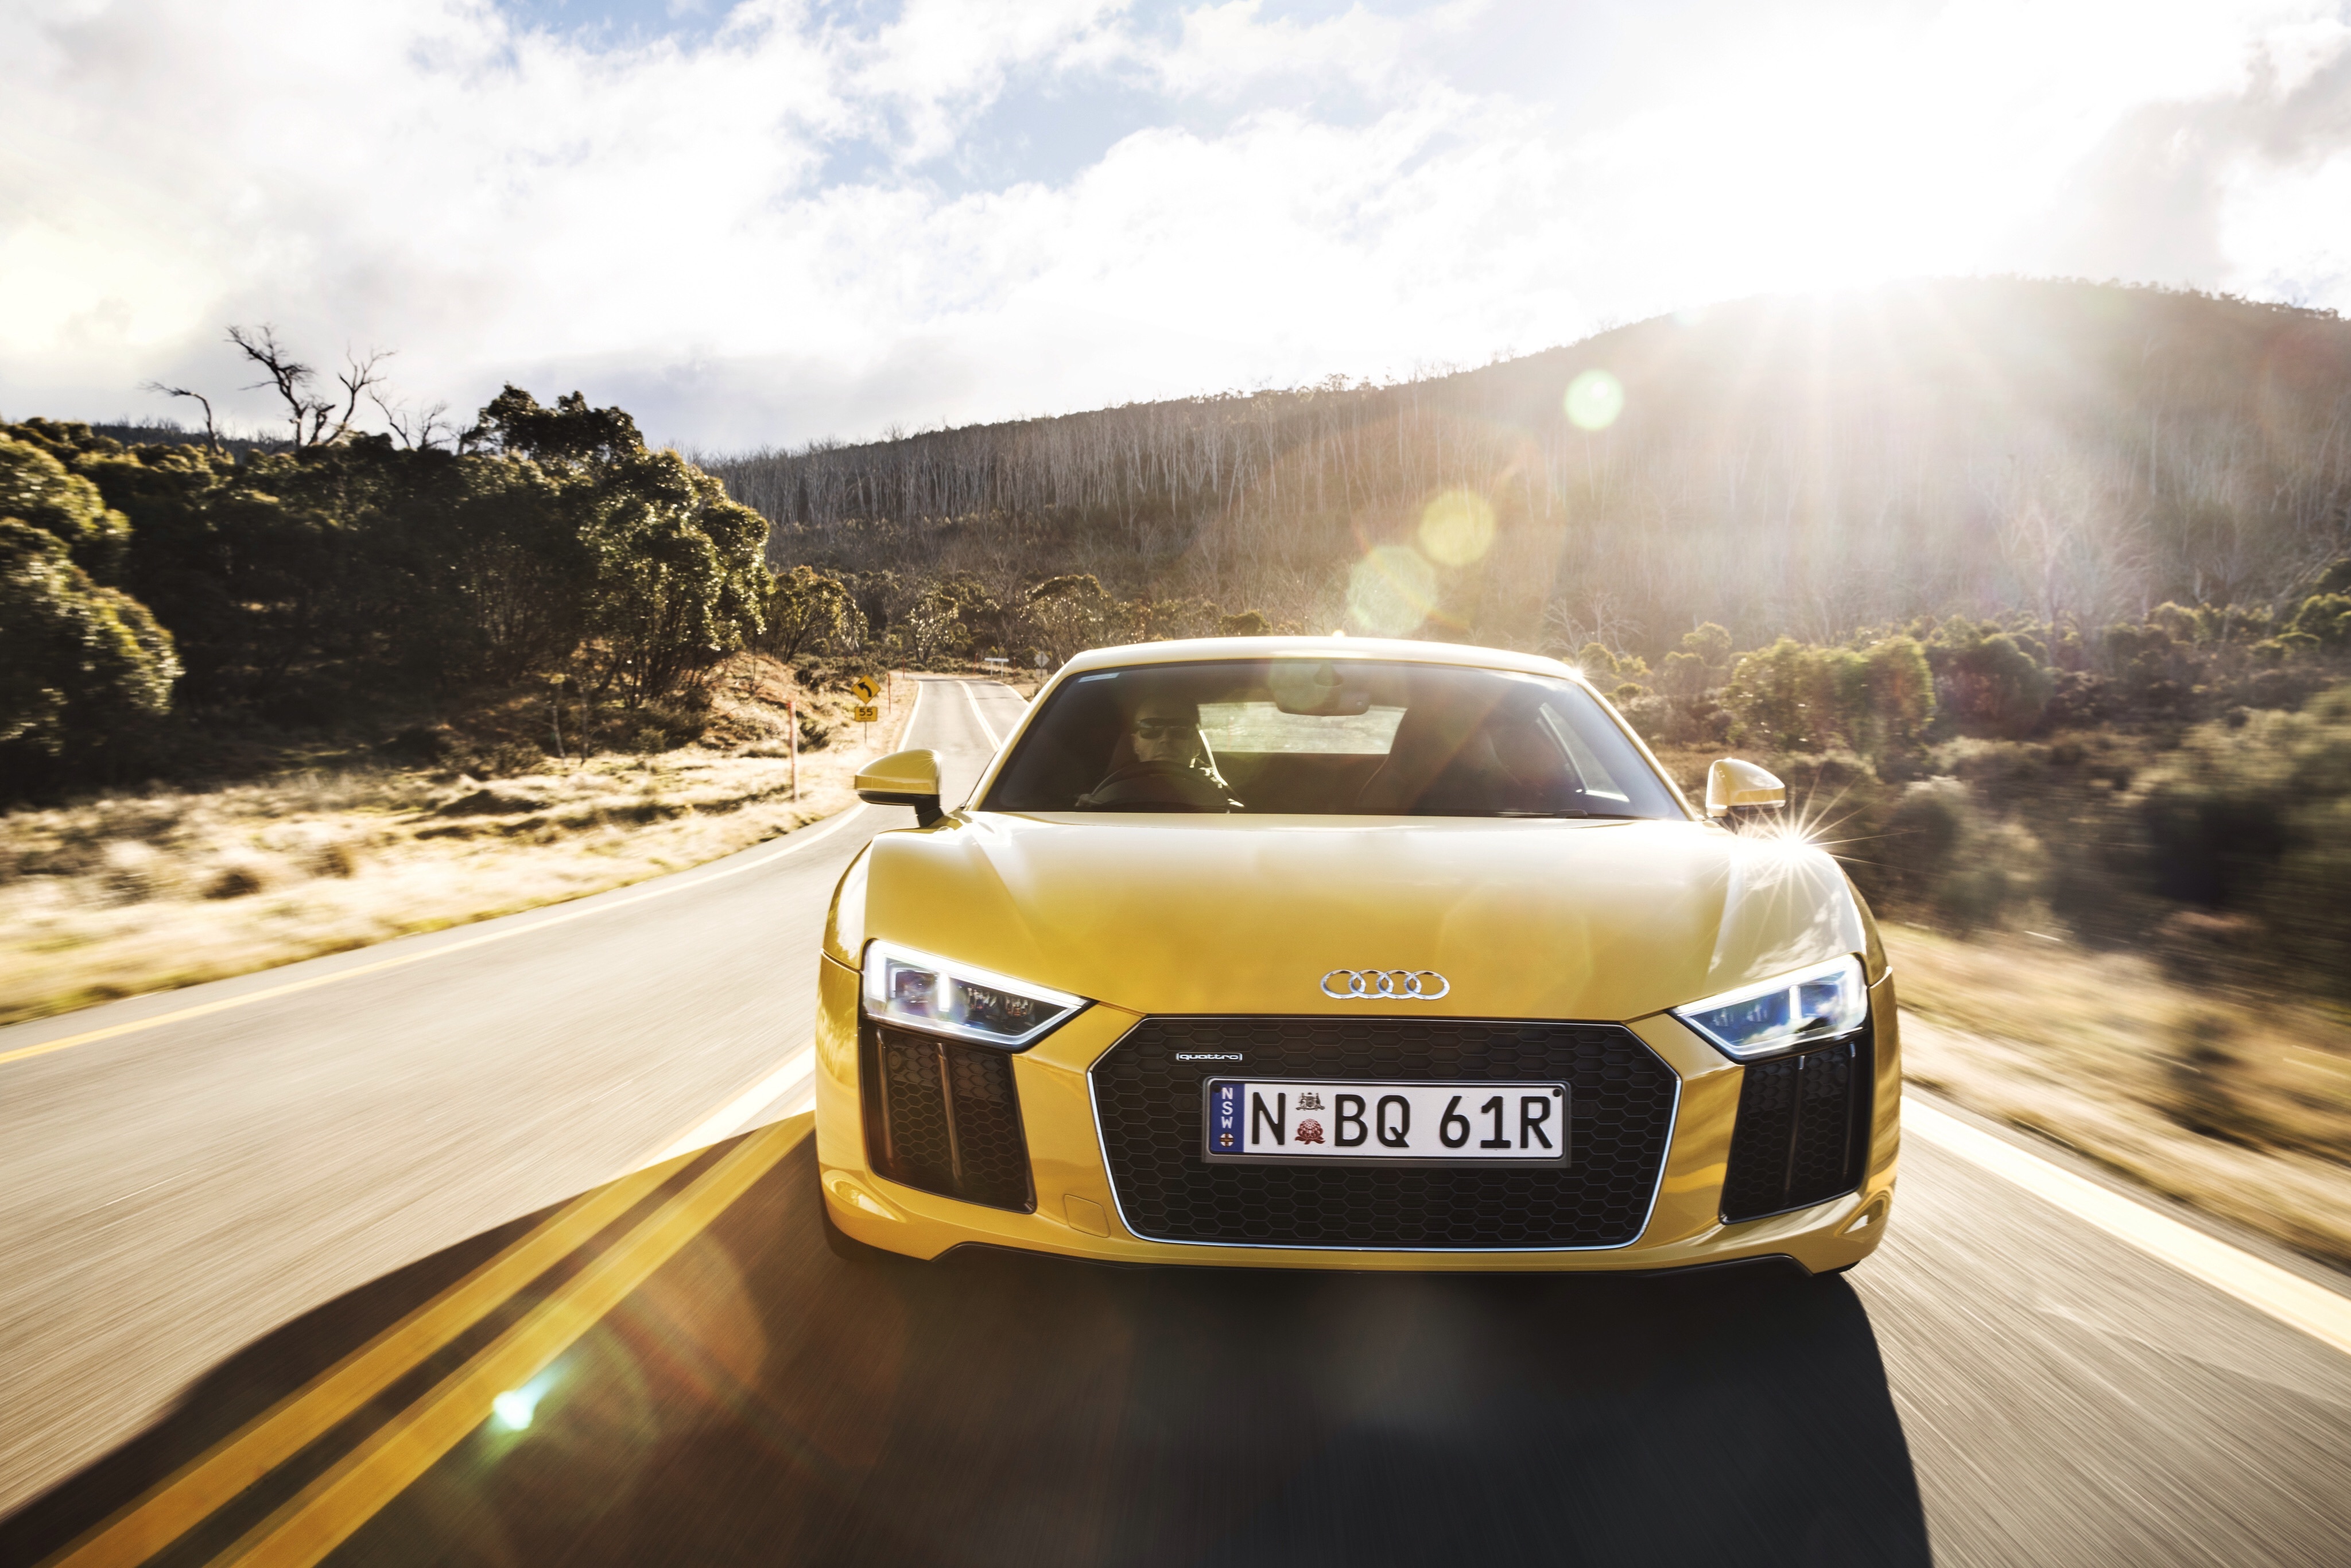 109188 download wallpaper audi, cars, yellow, front view, r8, v10 screensavers and pictures for free